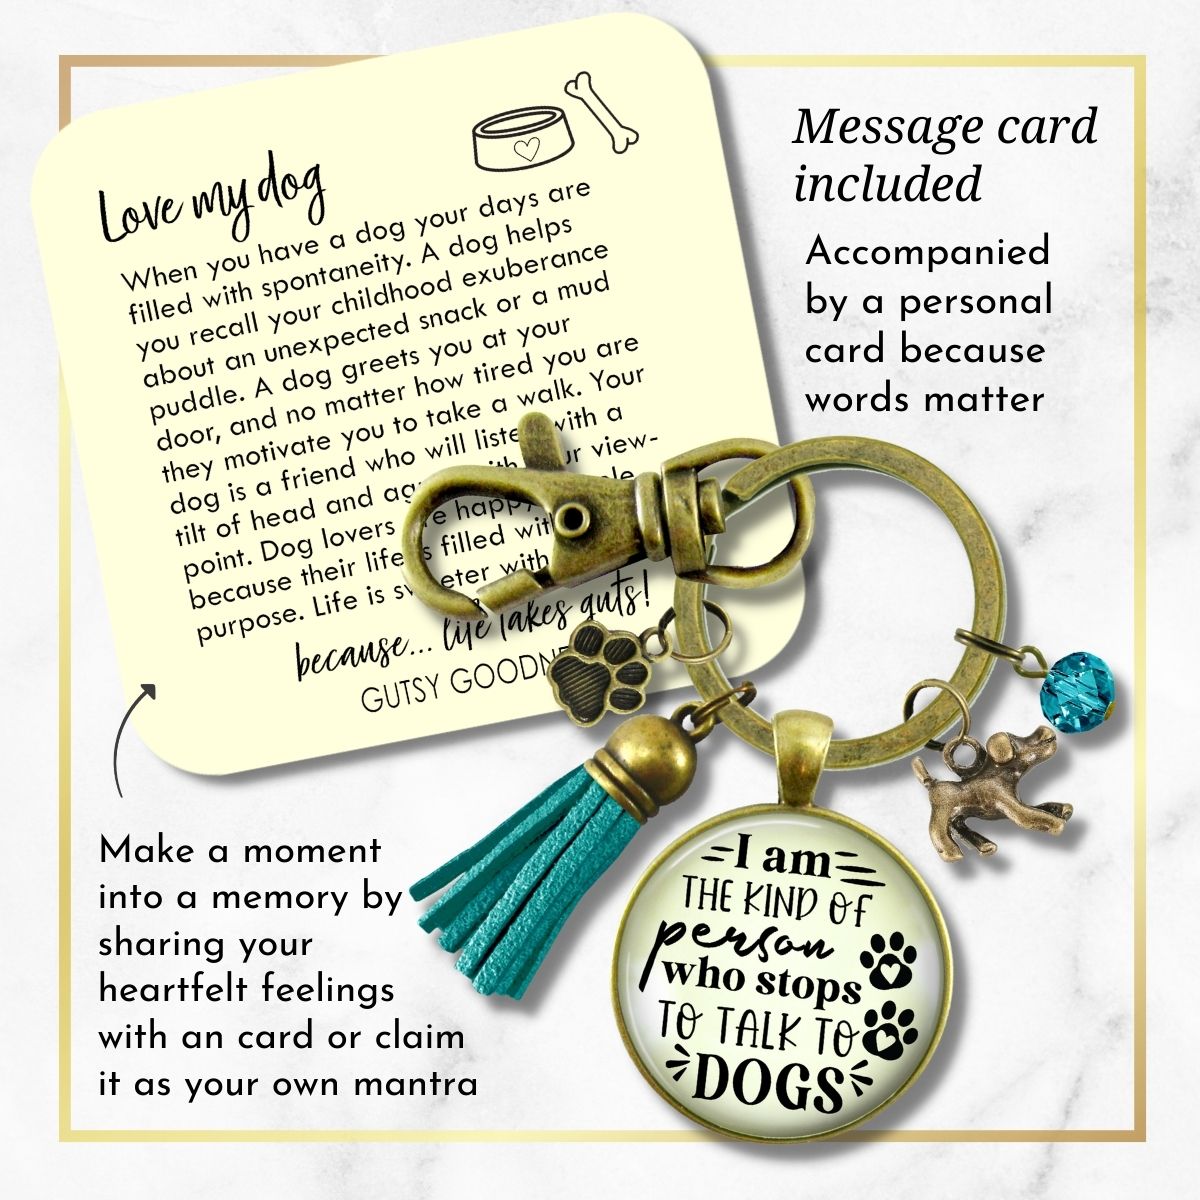 Handmade Gutsy Goodness Jewelry I Am The Kind Of Person Who Stops To Talk To Dogs Keychain Pet Lover Jewelry, Tassel Charm & Card